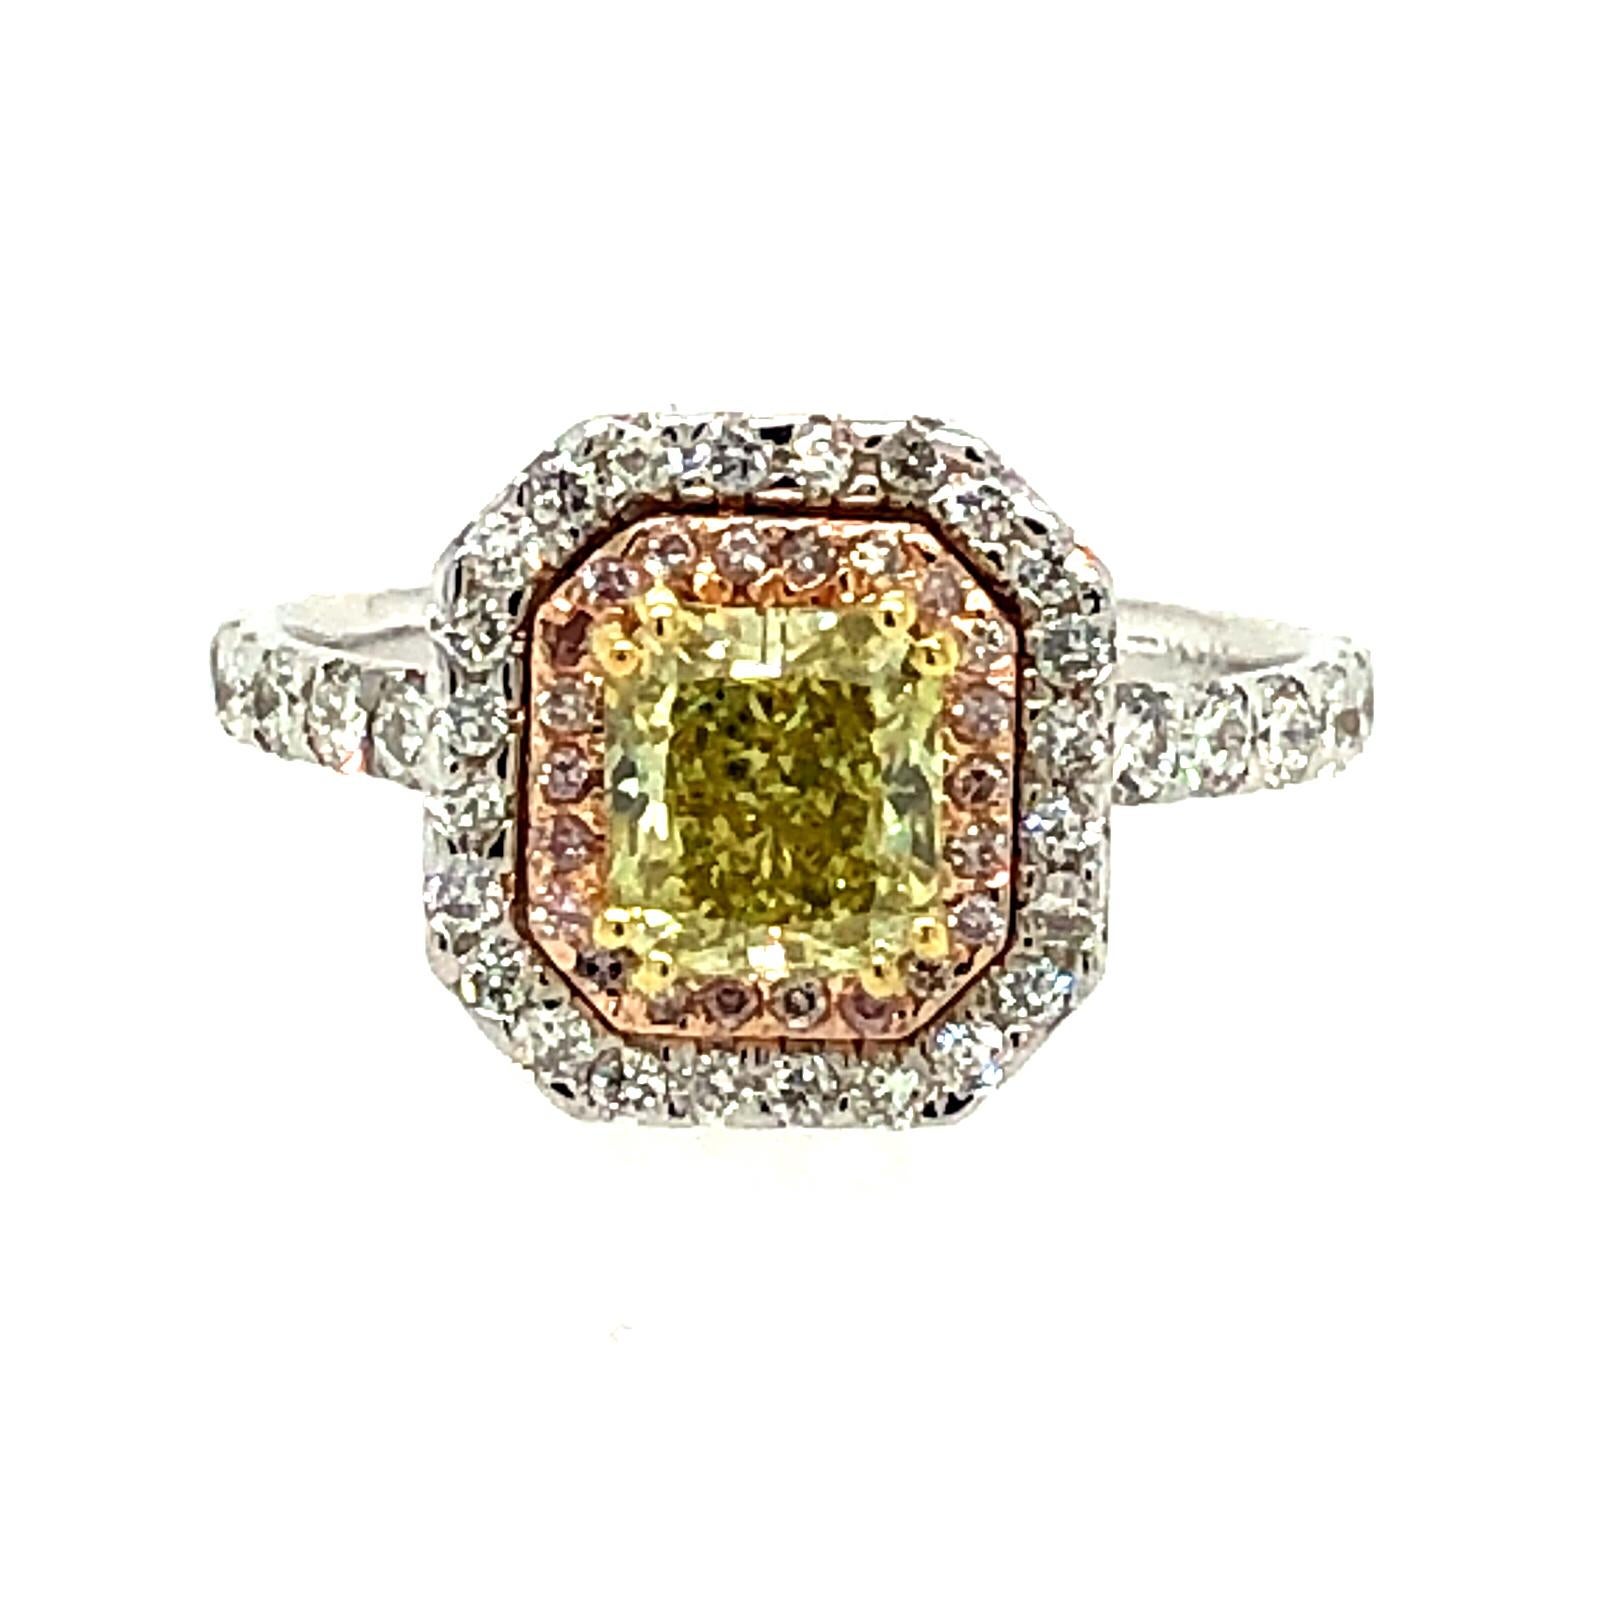 Contemporary 1.85 Carat Radiant GIA Cert Fancy Intense Yellow and Pink Diamond Ring 18kt Gold